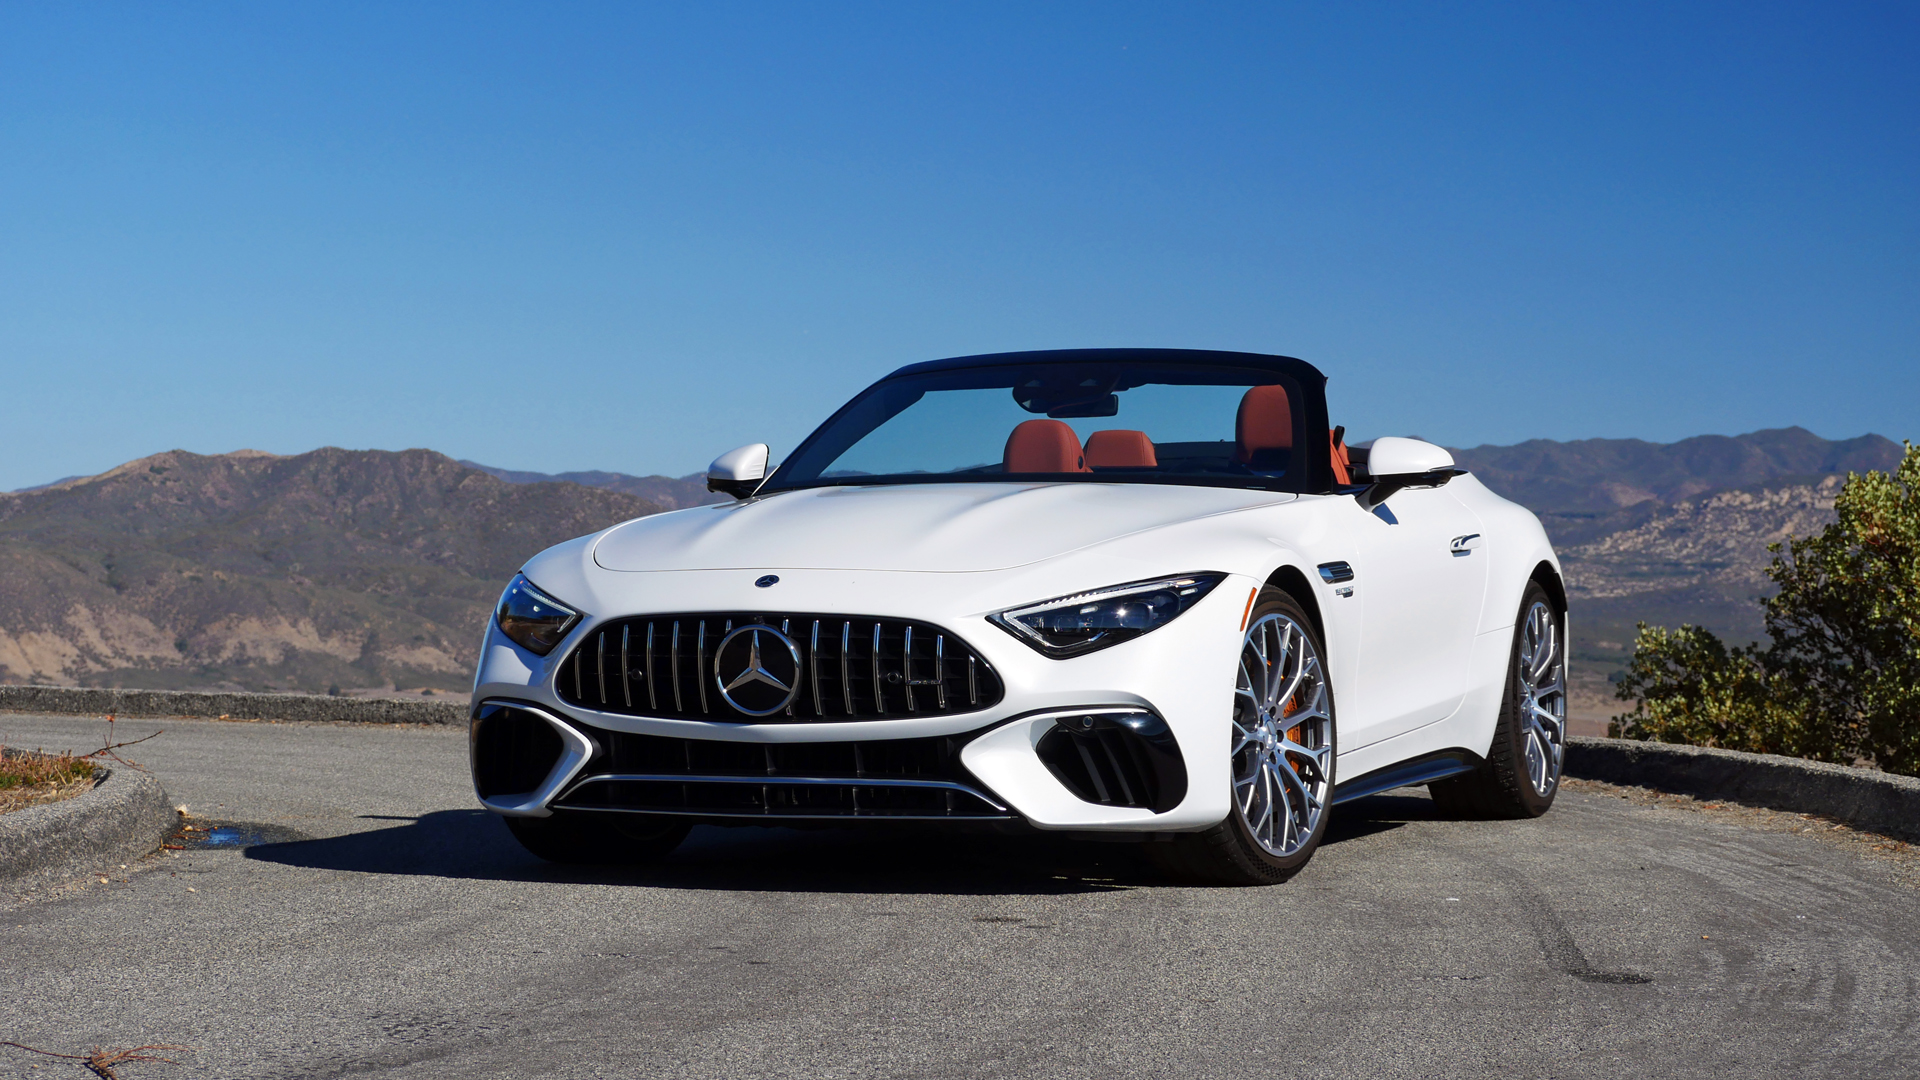 2022 MercedesAMG SL 55 First Drive Review When 55 is greater than 63